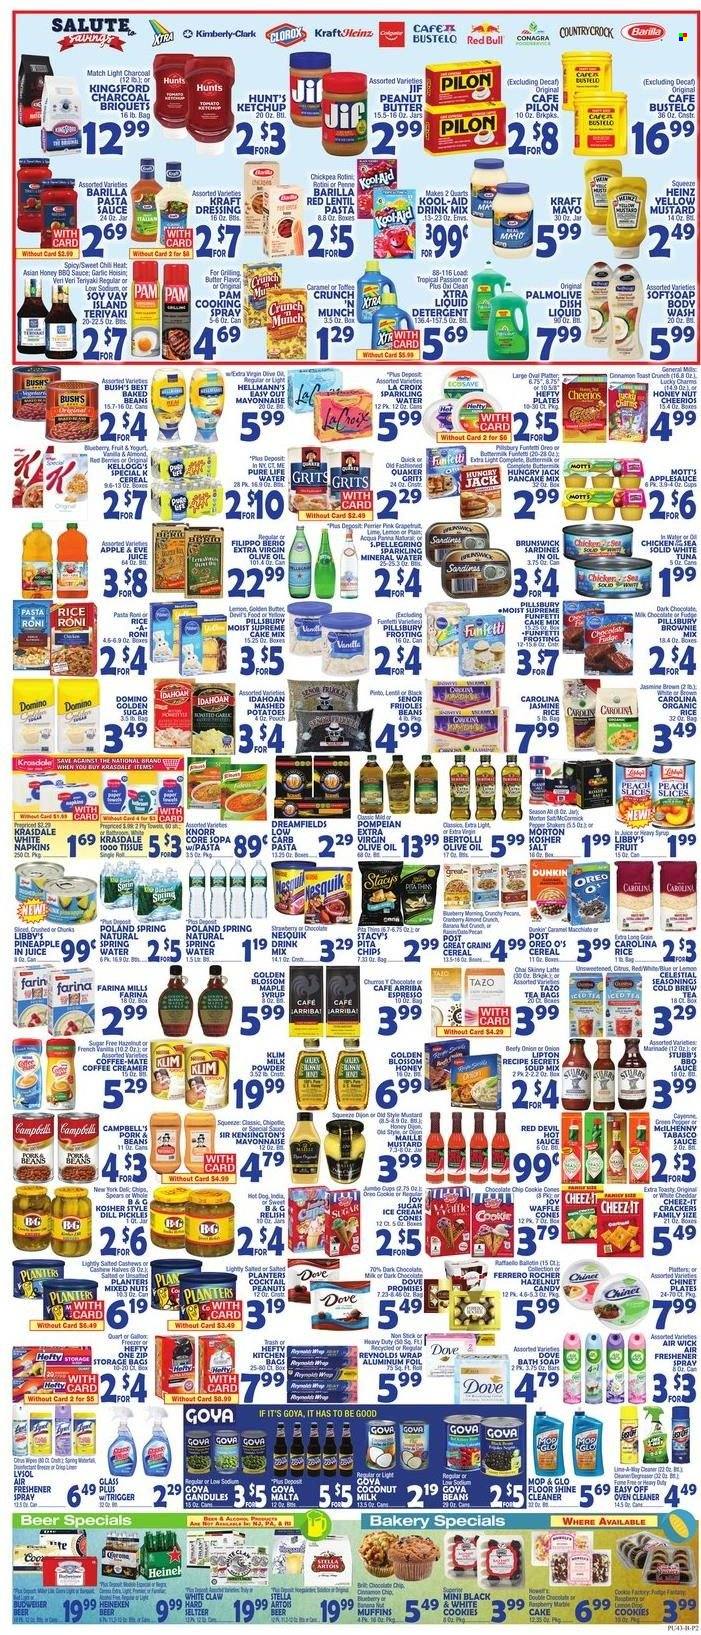 thumbnail - Bravo Supermarkets Flyer - 05/20/2022 - 05/26/2022 - Sales products - muffin, brownie mix, cake mix, garlic, pineapple, Mott's, sardines, tuna, mashed potatoes, hot dog, pasta sauce, soup mix, soup, Knorr, pancakes, Pillsbury, Barilla, Quaker, Kraft®, Bertolli, Oreo, Nesquik, Coffee-Mate, milk powder, Blossom, creamer, mayonnaise, Hellmann’s, ice cream, cookies, fudge, Ferrero Rocher, crackers, Kellogg's, dark chocolate, dill pickle, chips, Cheez-It, pita chips, frosting, tabasco, grits, coconut milk, Heinz, baked beans, Goya, cereals, Cheerios, rice, penne, dill, caramel, mustard, hoisin sauce, ketchup, dressing, marinade, cooking spray, extra virgin olive oil, olive oil, apple sauce, maple syrup, peanut butter, syrup, Jif, cashews, peanuts, mixed nuts, Planters, juice, Lipton, Red Bull, mineral water, spring water, sparkling water, San Pellegrino, tea bags, gin, White Claw, Hard Seltzer, beer, Heineken, napkins, Dove, tissues, detergent, cleaner, Lysol, Clorox, liquid detergent, XTRA, dishwashing liquid, body wash, Softsoap, Palmolive, soap, Hefty, Stella Artois. Page 3.